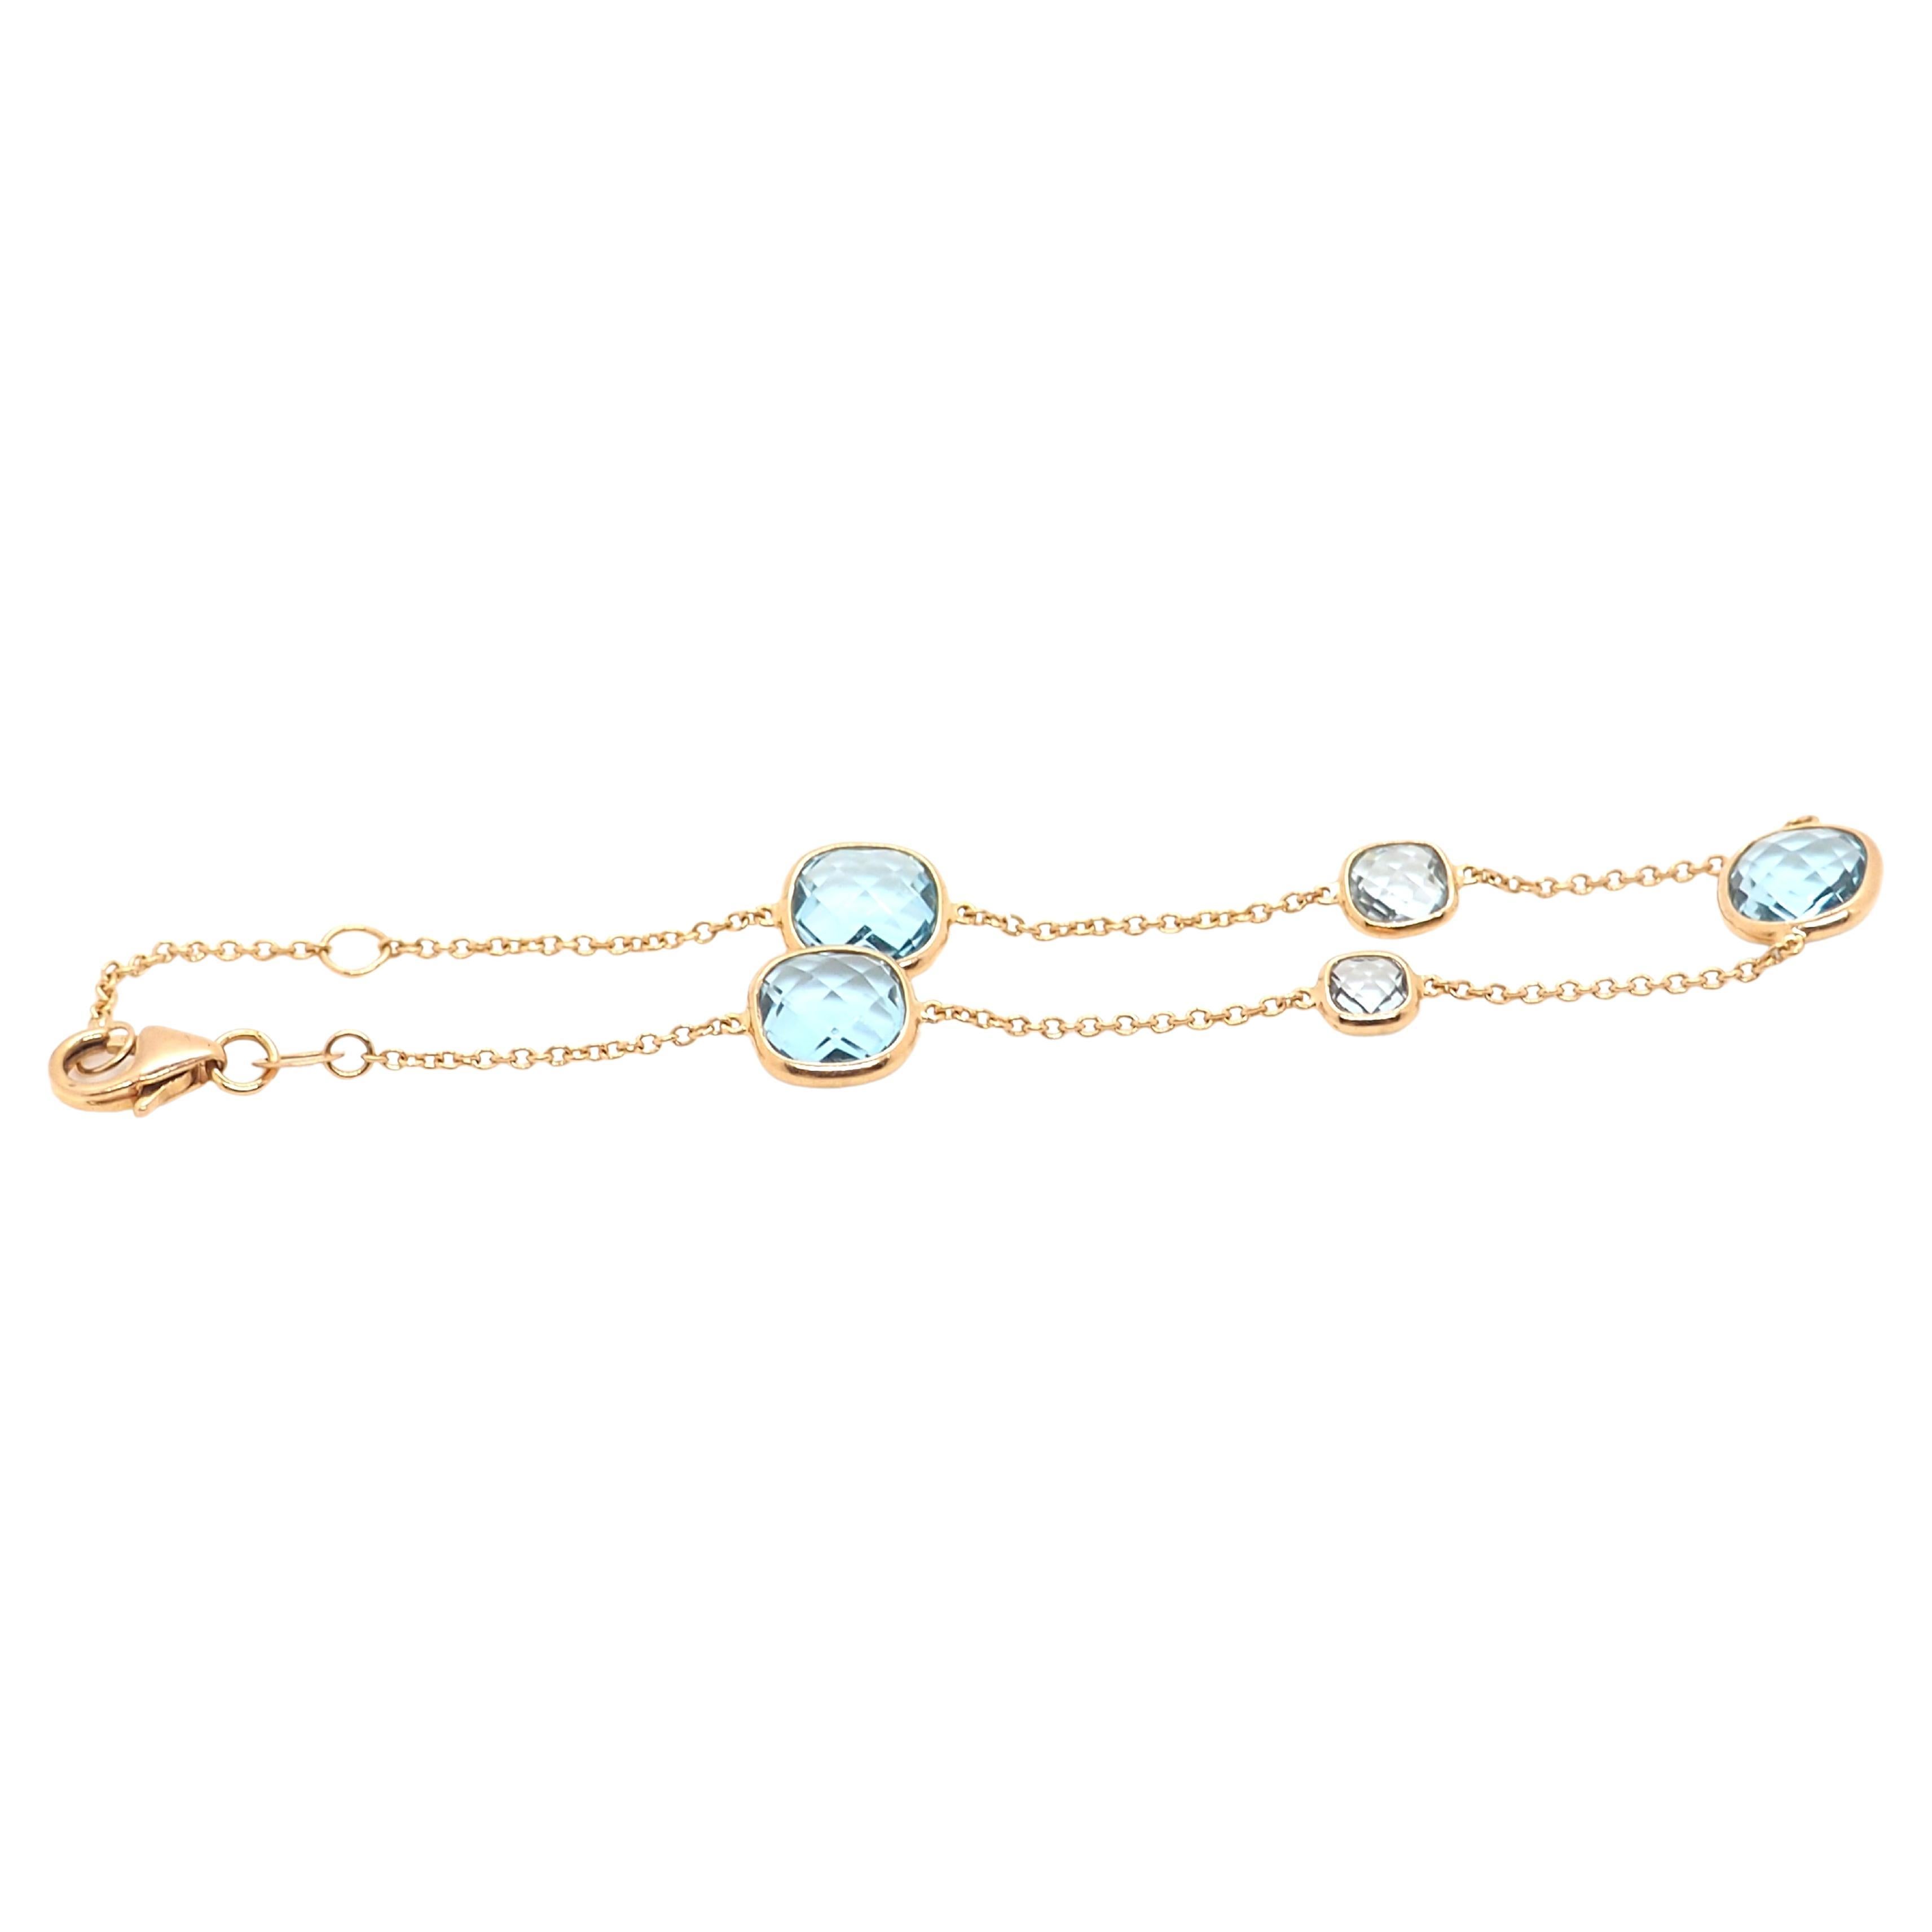 Introducing the Exquisite Bracelet Colour Drops in 18K Rose Gold (4N) - A Timeless Masterpiece of Luxury and Elegance! Impeccably crafted in 18K Rose Gold (4N), it exudes a warmth and radiance that is simply mesmerizing. 
At a length of 18 cm, this